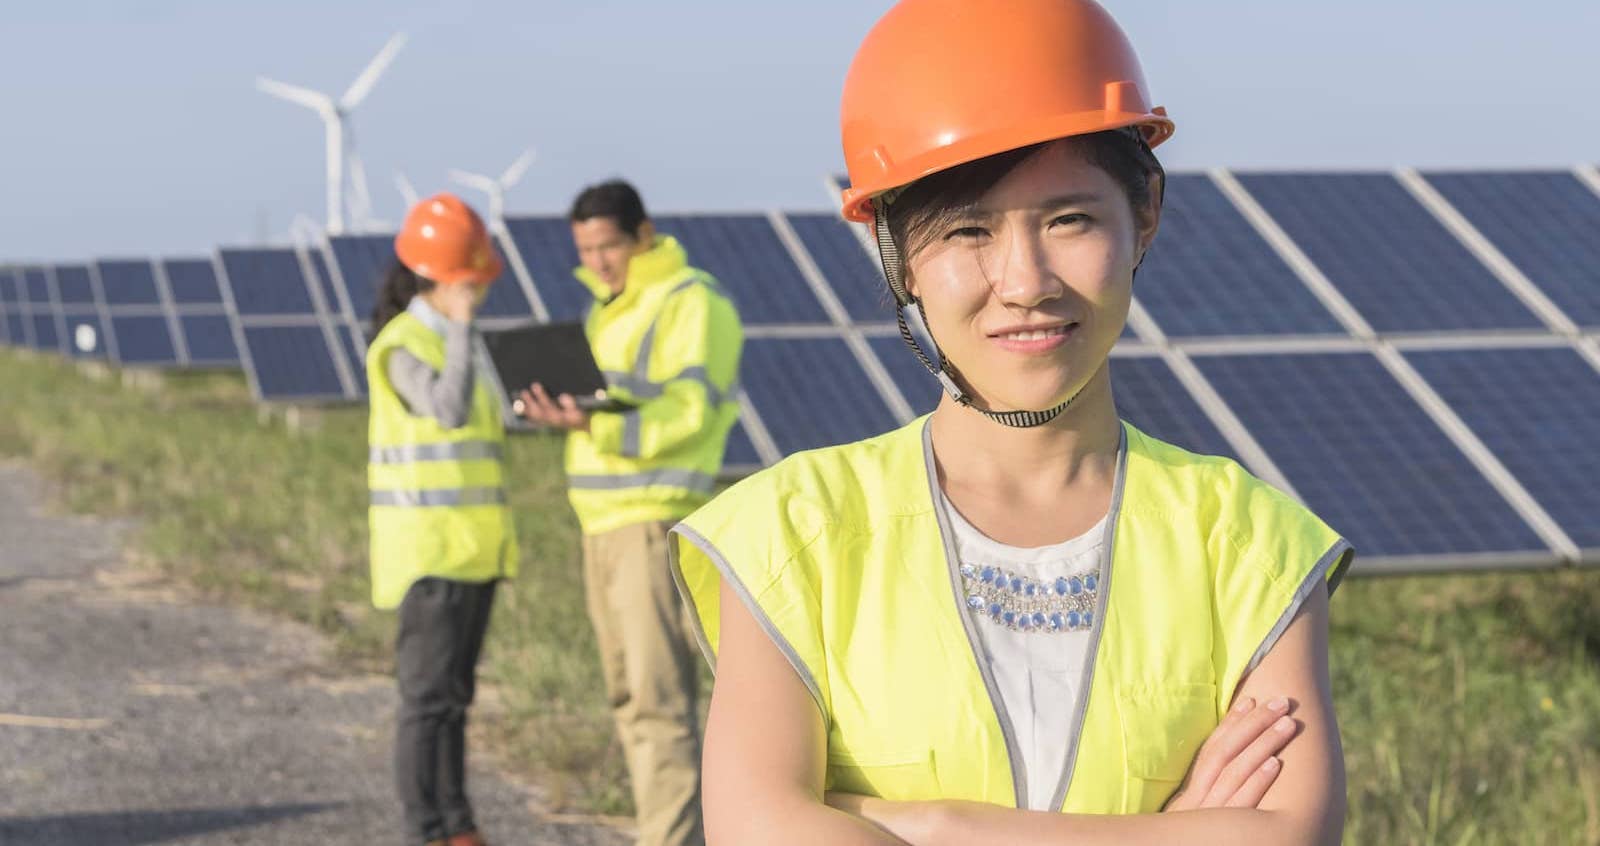 A woman in a hard hat smiling at the camera with two others talking in the background